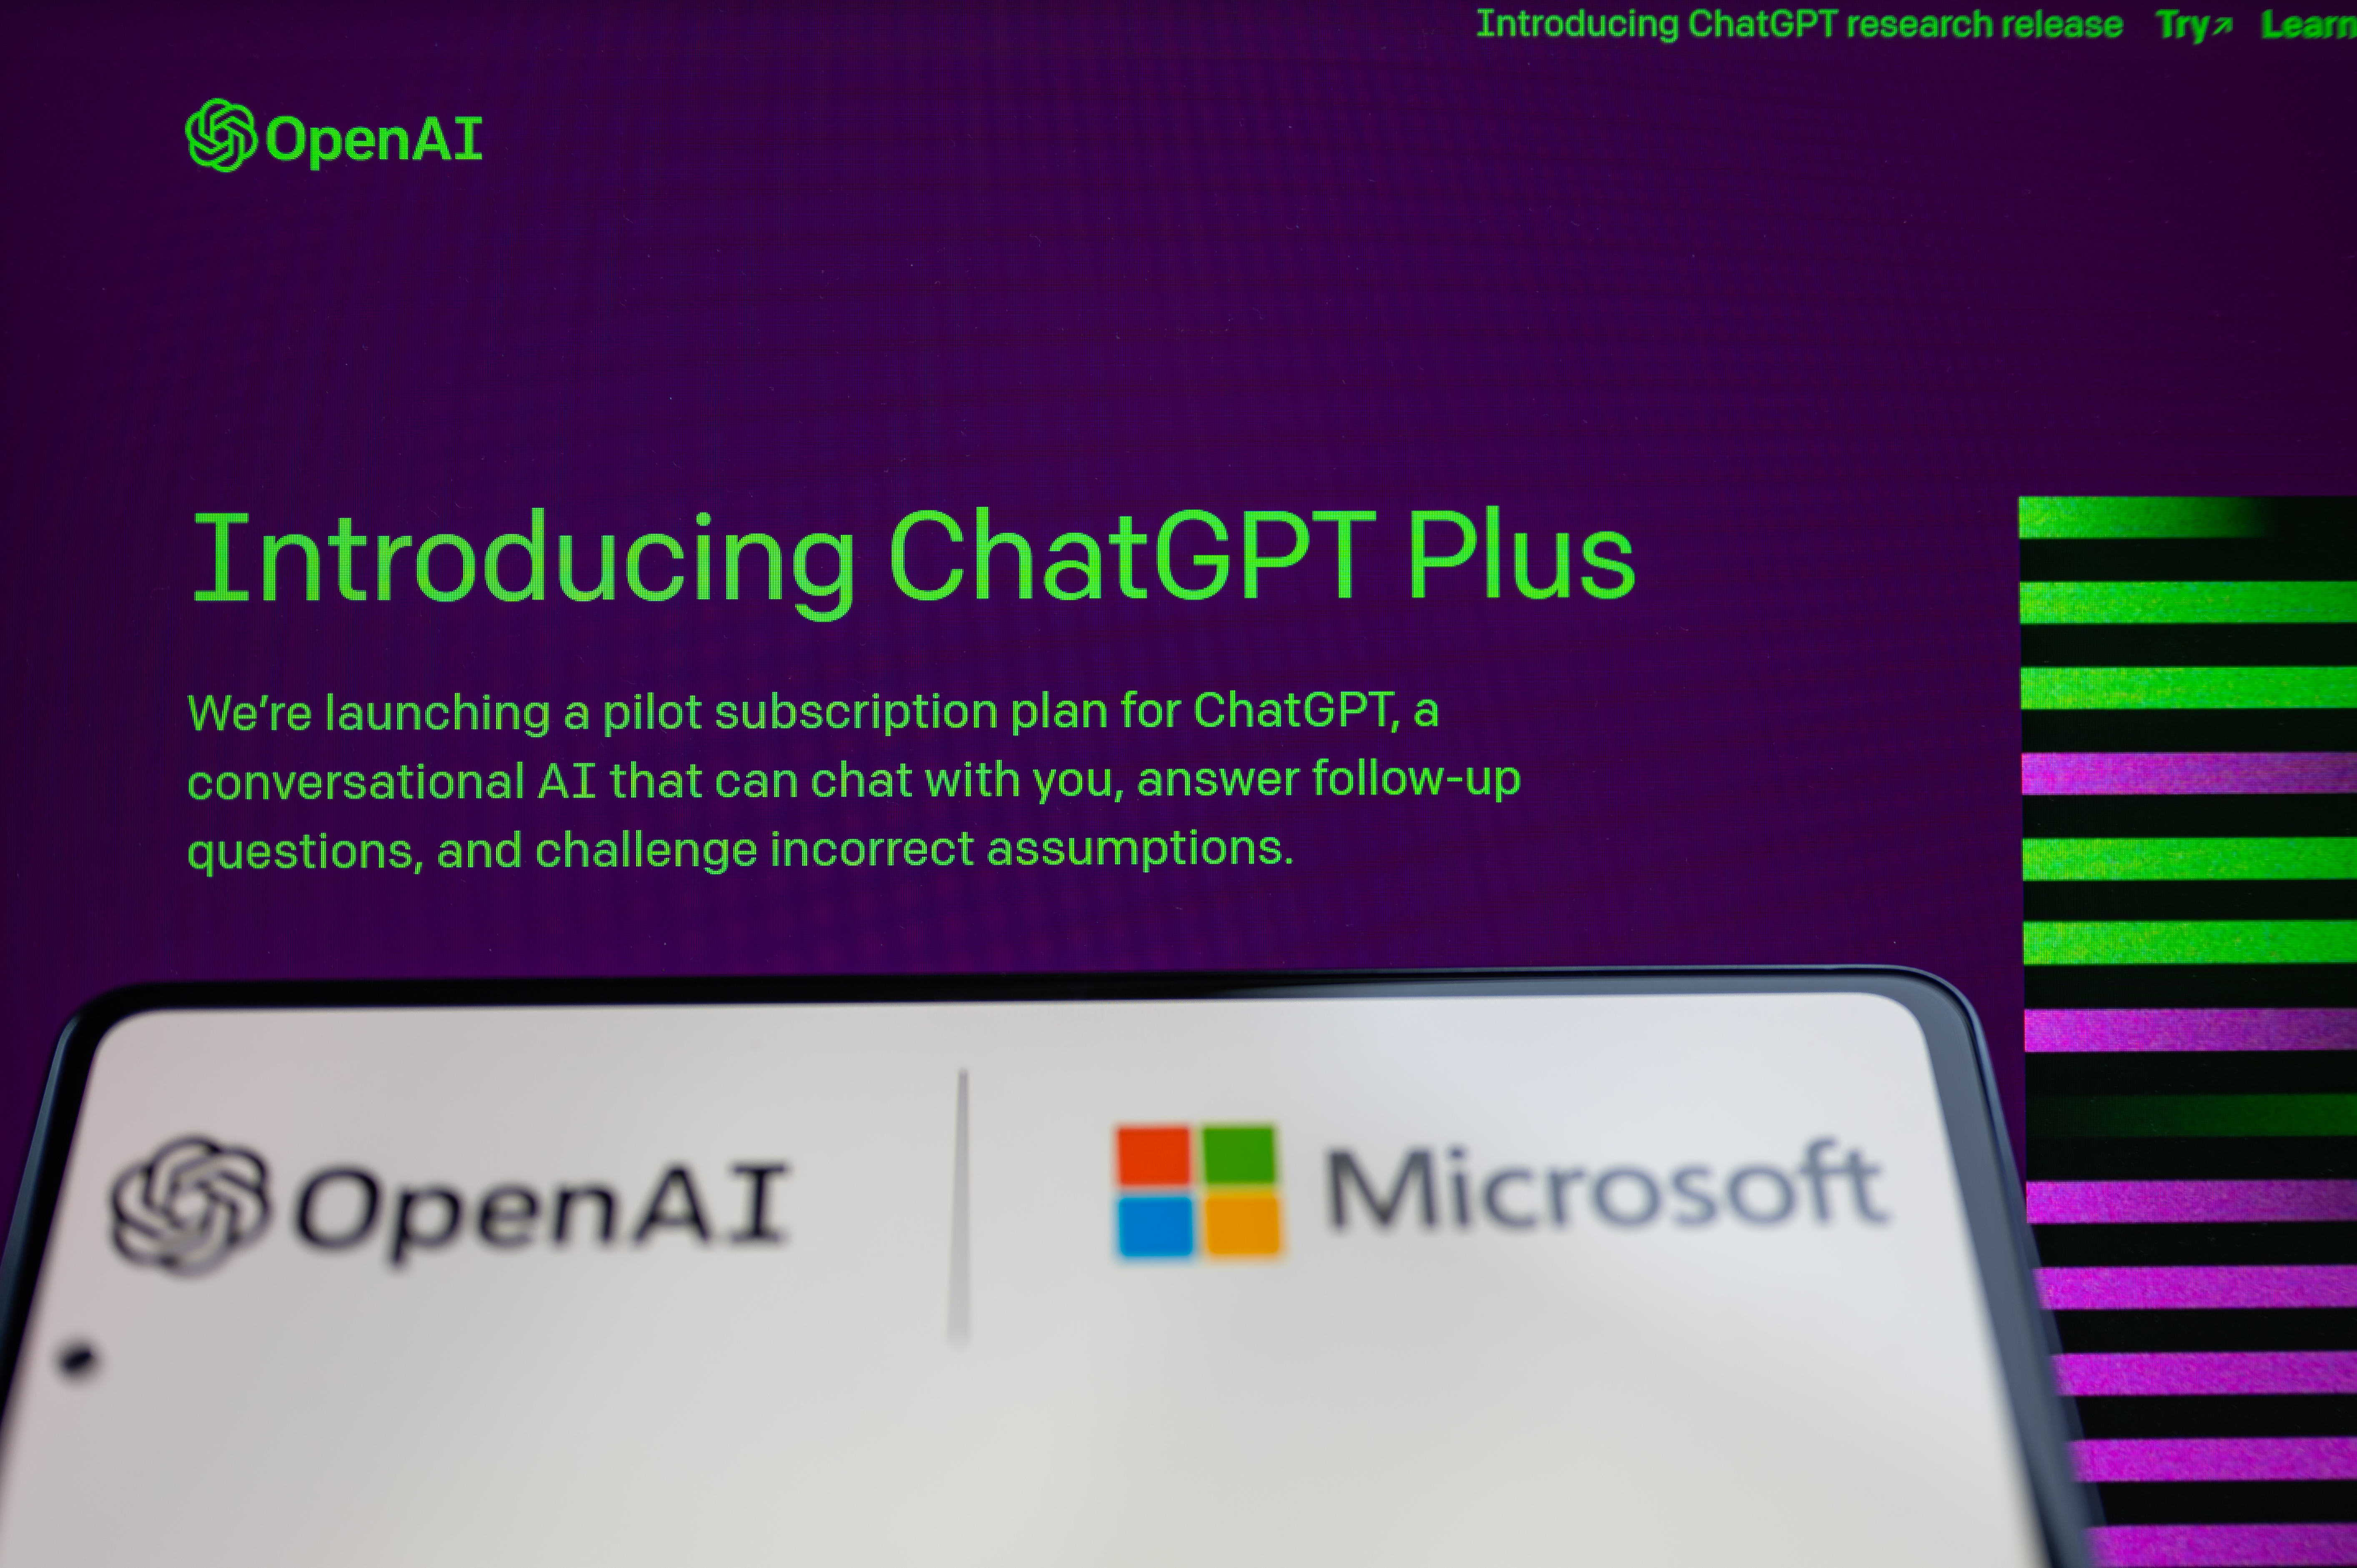 How (and why) to subscribe to ChatGPT Plus?